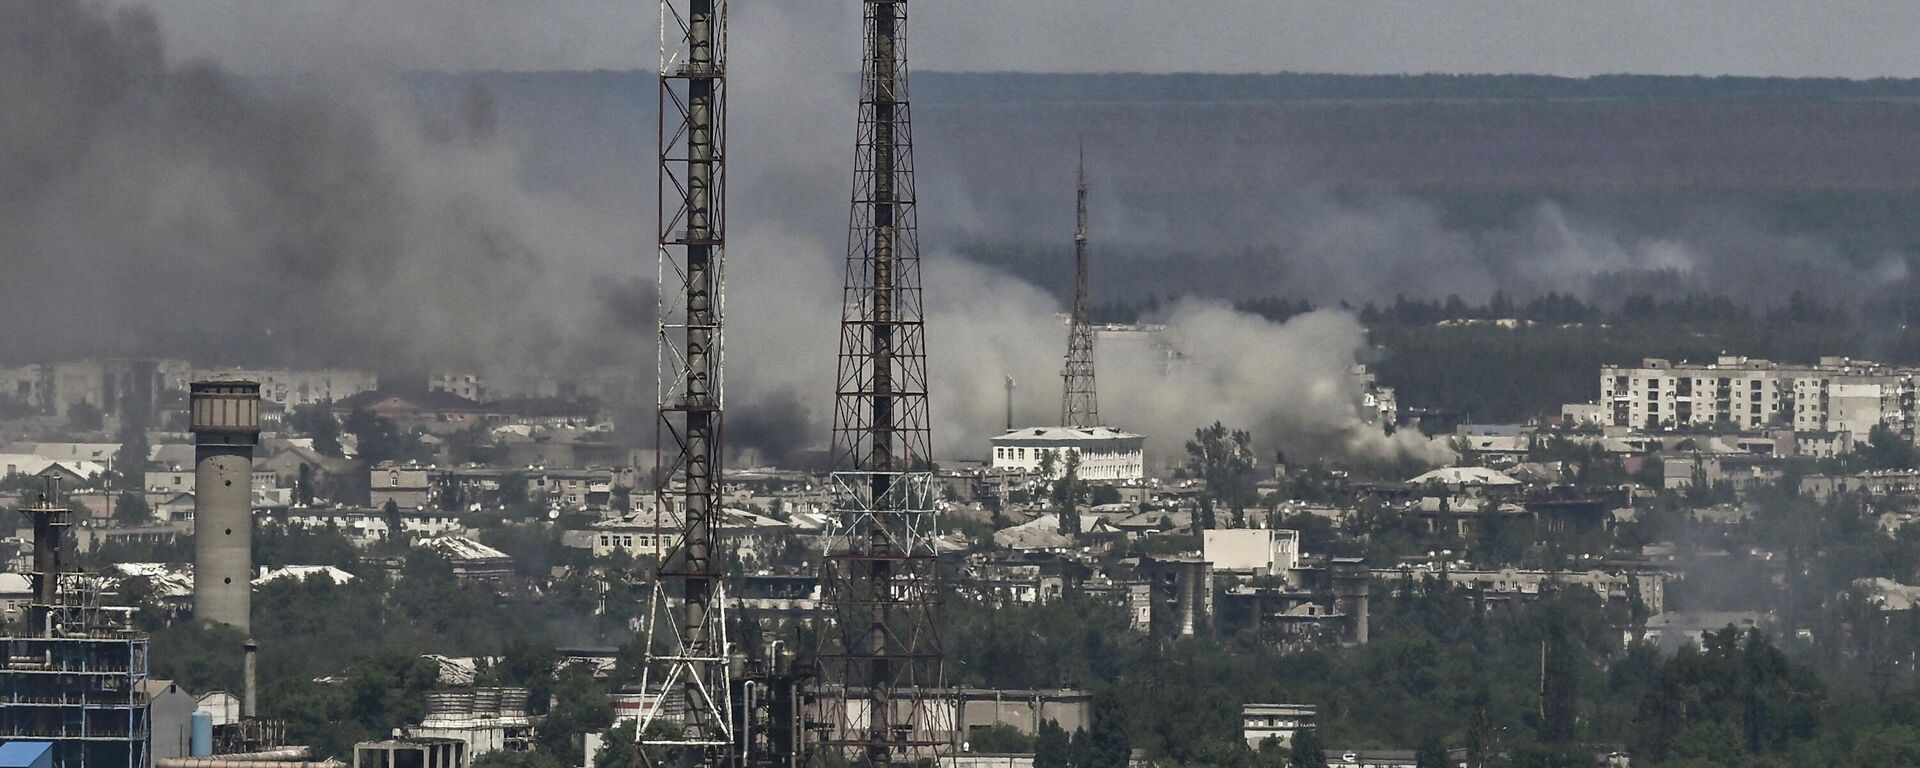 Black smoke and dirt rise from the nearby city of Severodonetsk during battle between Russian and Ukrainian troops in Donbass on 9 June, 2022. - Sputnik International, 1920, 22.06.2022